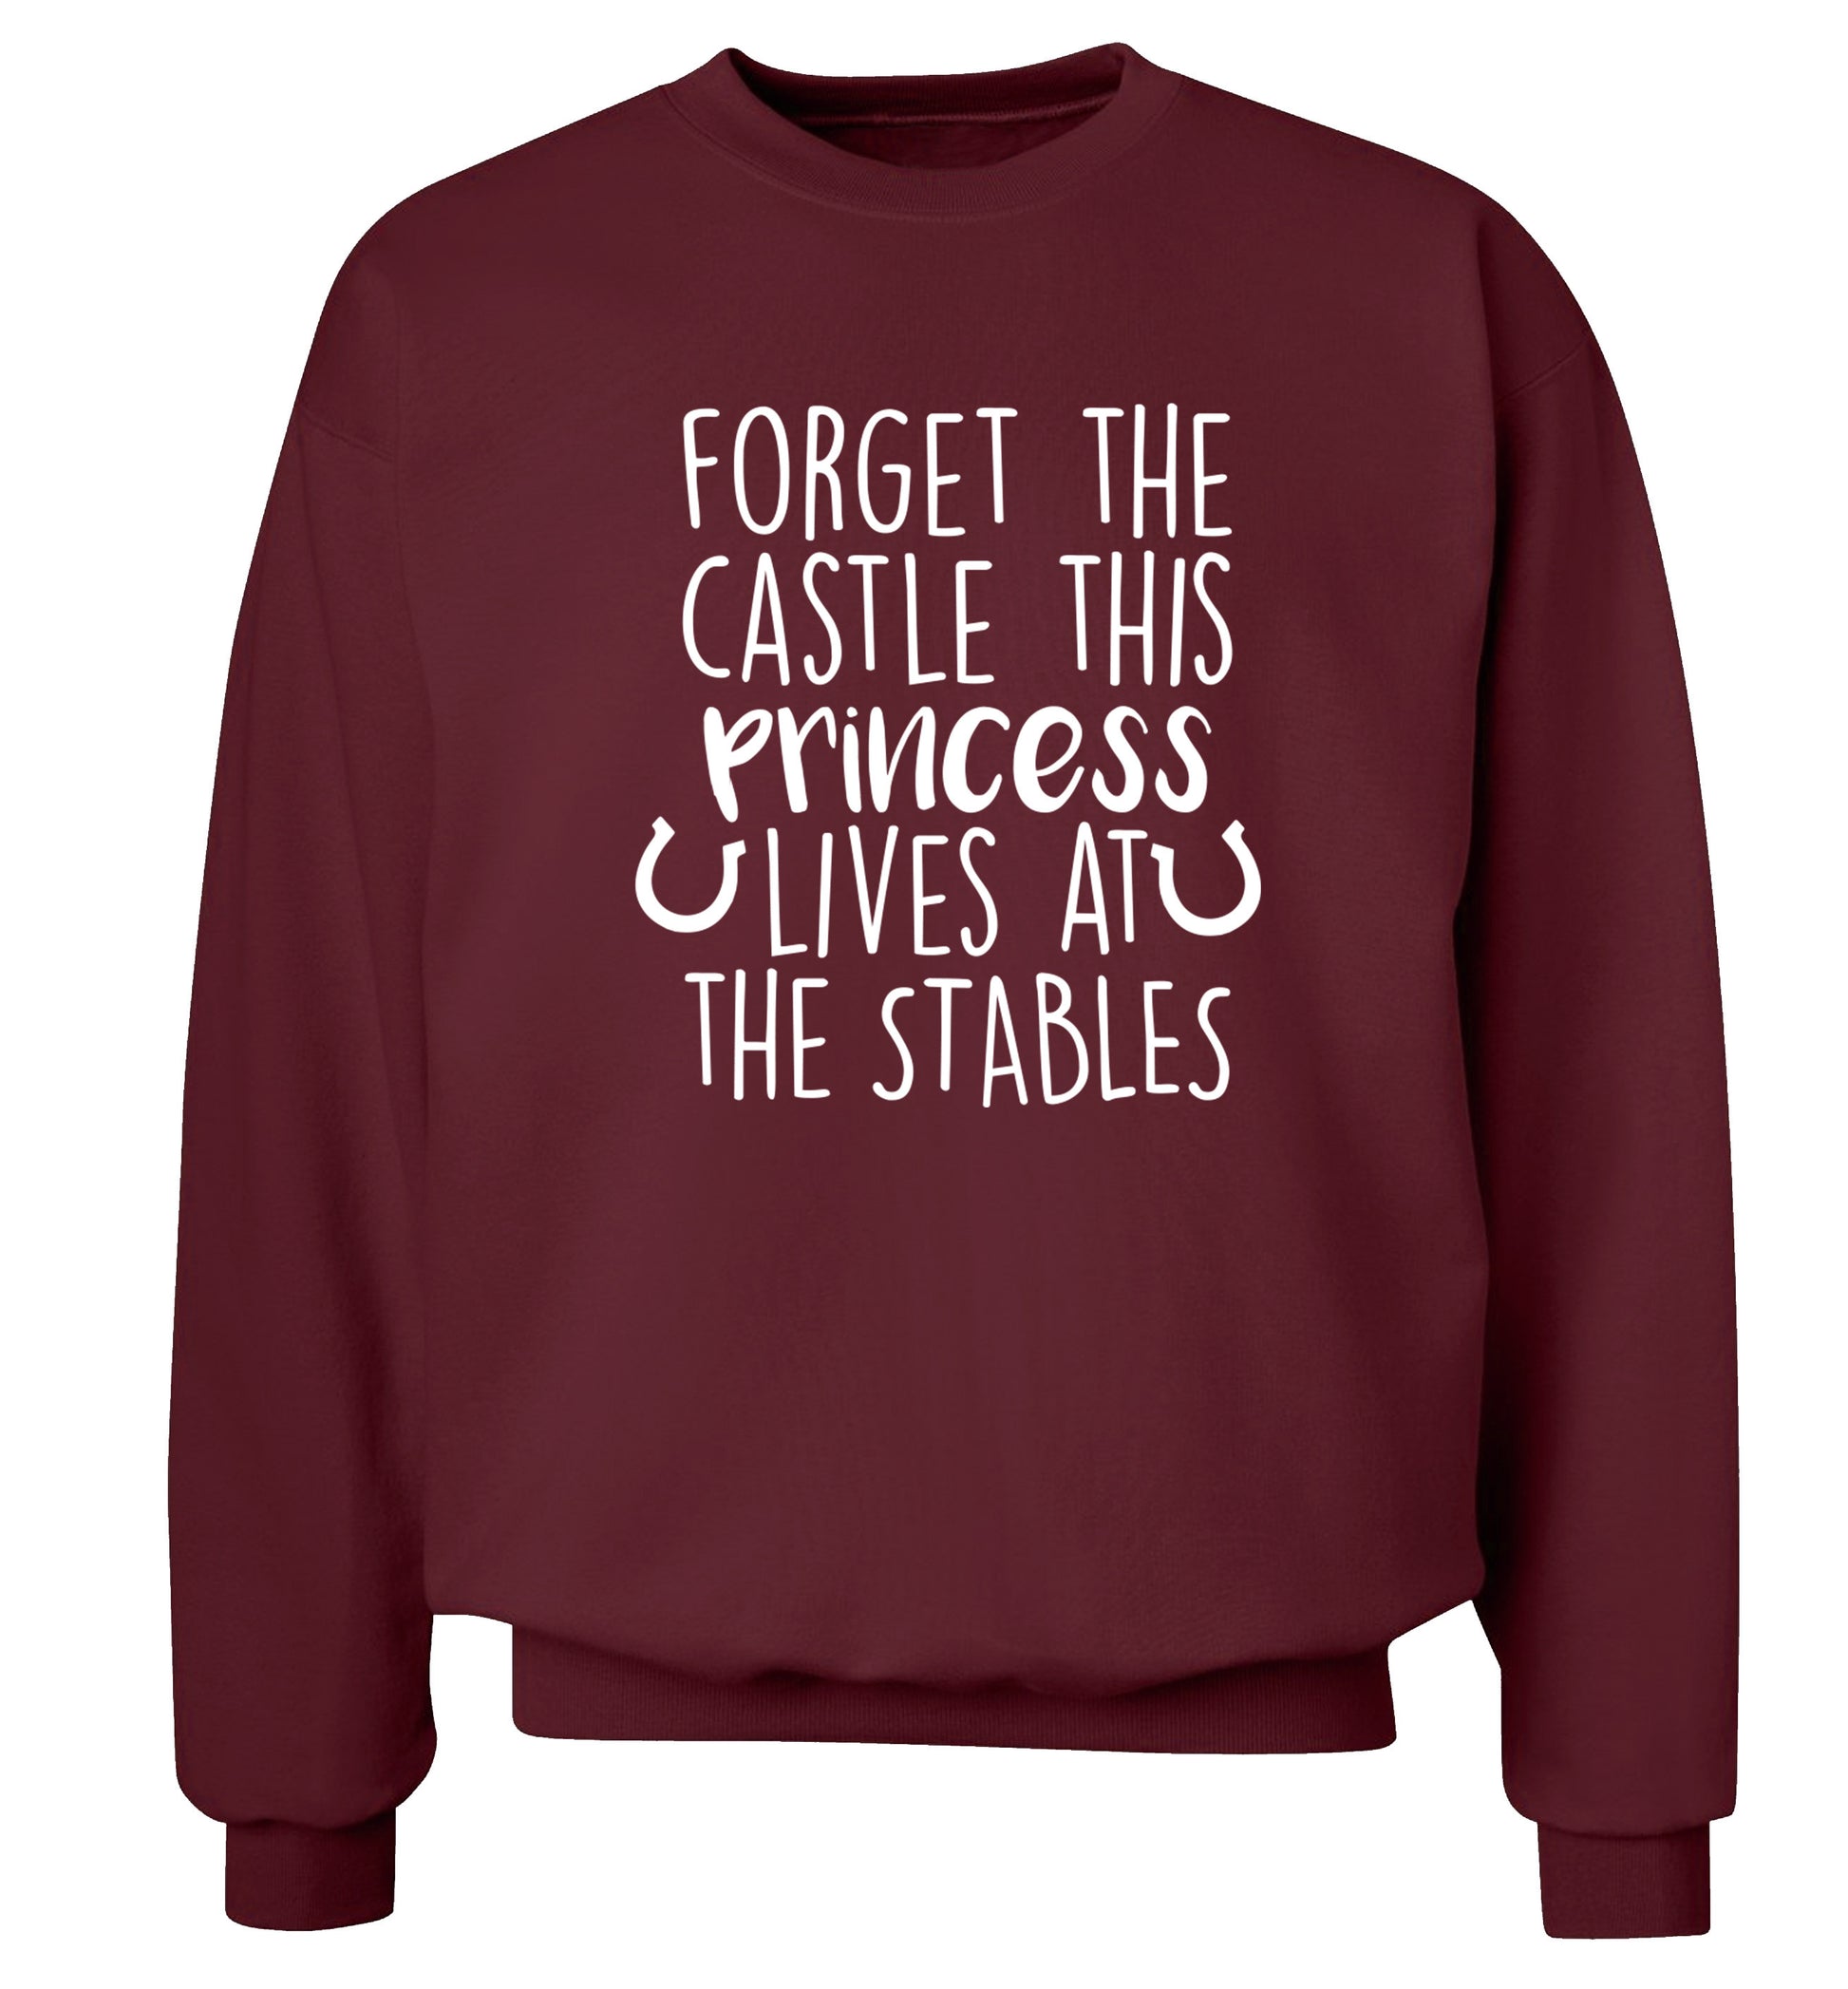 Forget the castle this princess lives at the stables Adult's unisex maroon Sweater 2XL